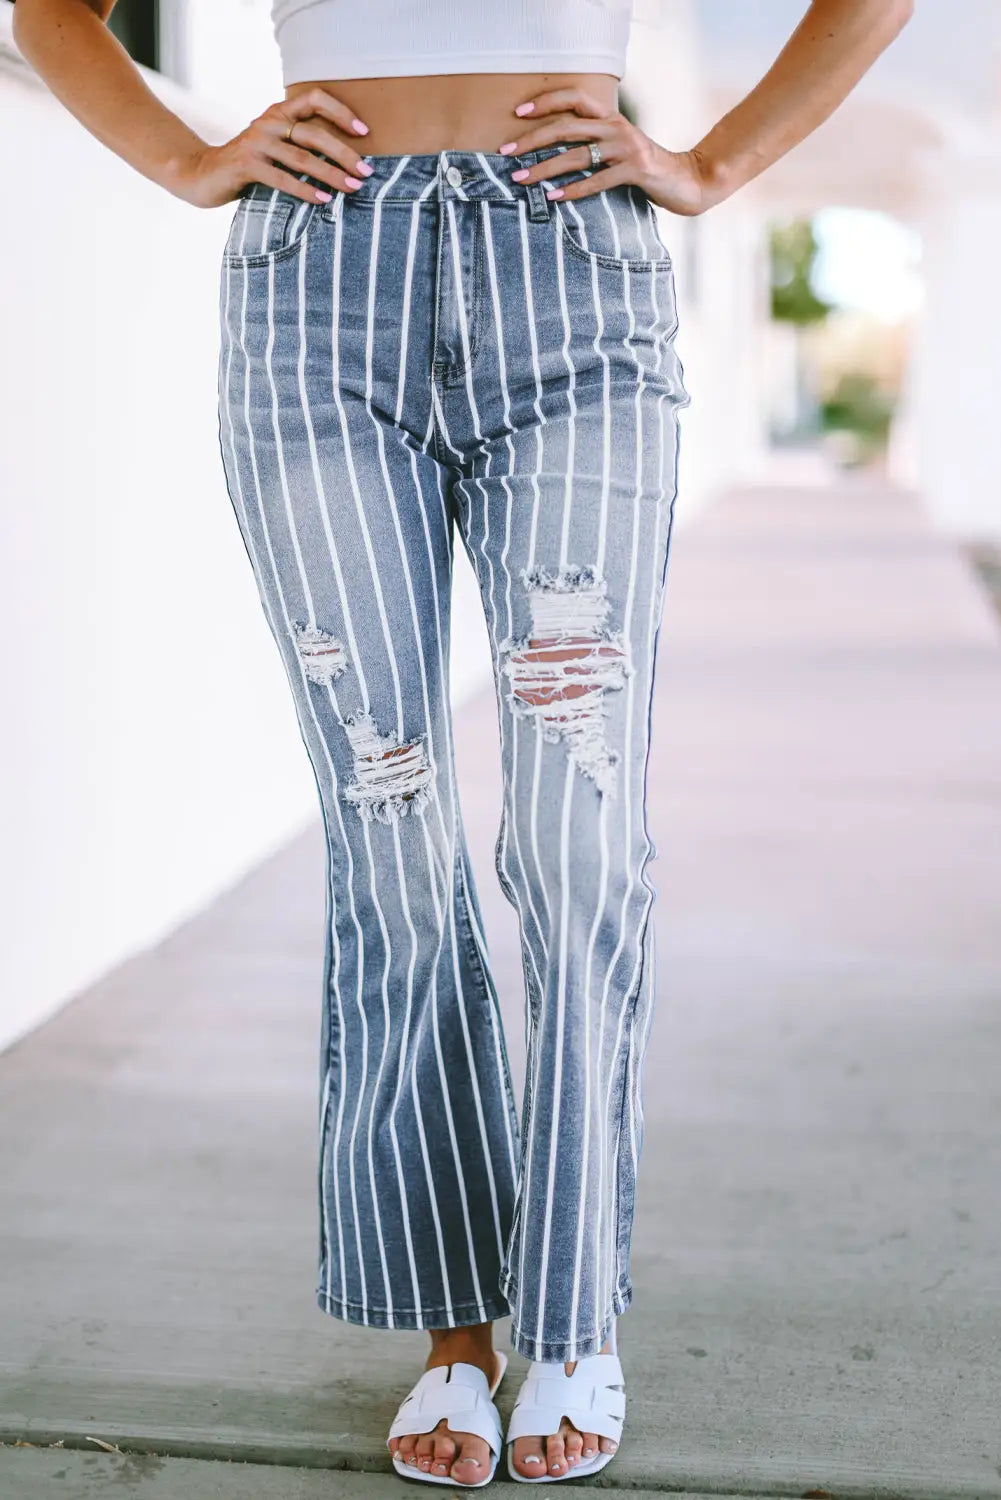 Sky blue vertical striped ripped flare jeans - 6 71.5% cotton + 25% polyester + 2% viscose + 1.5% elastane